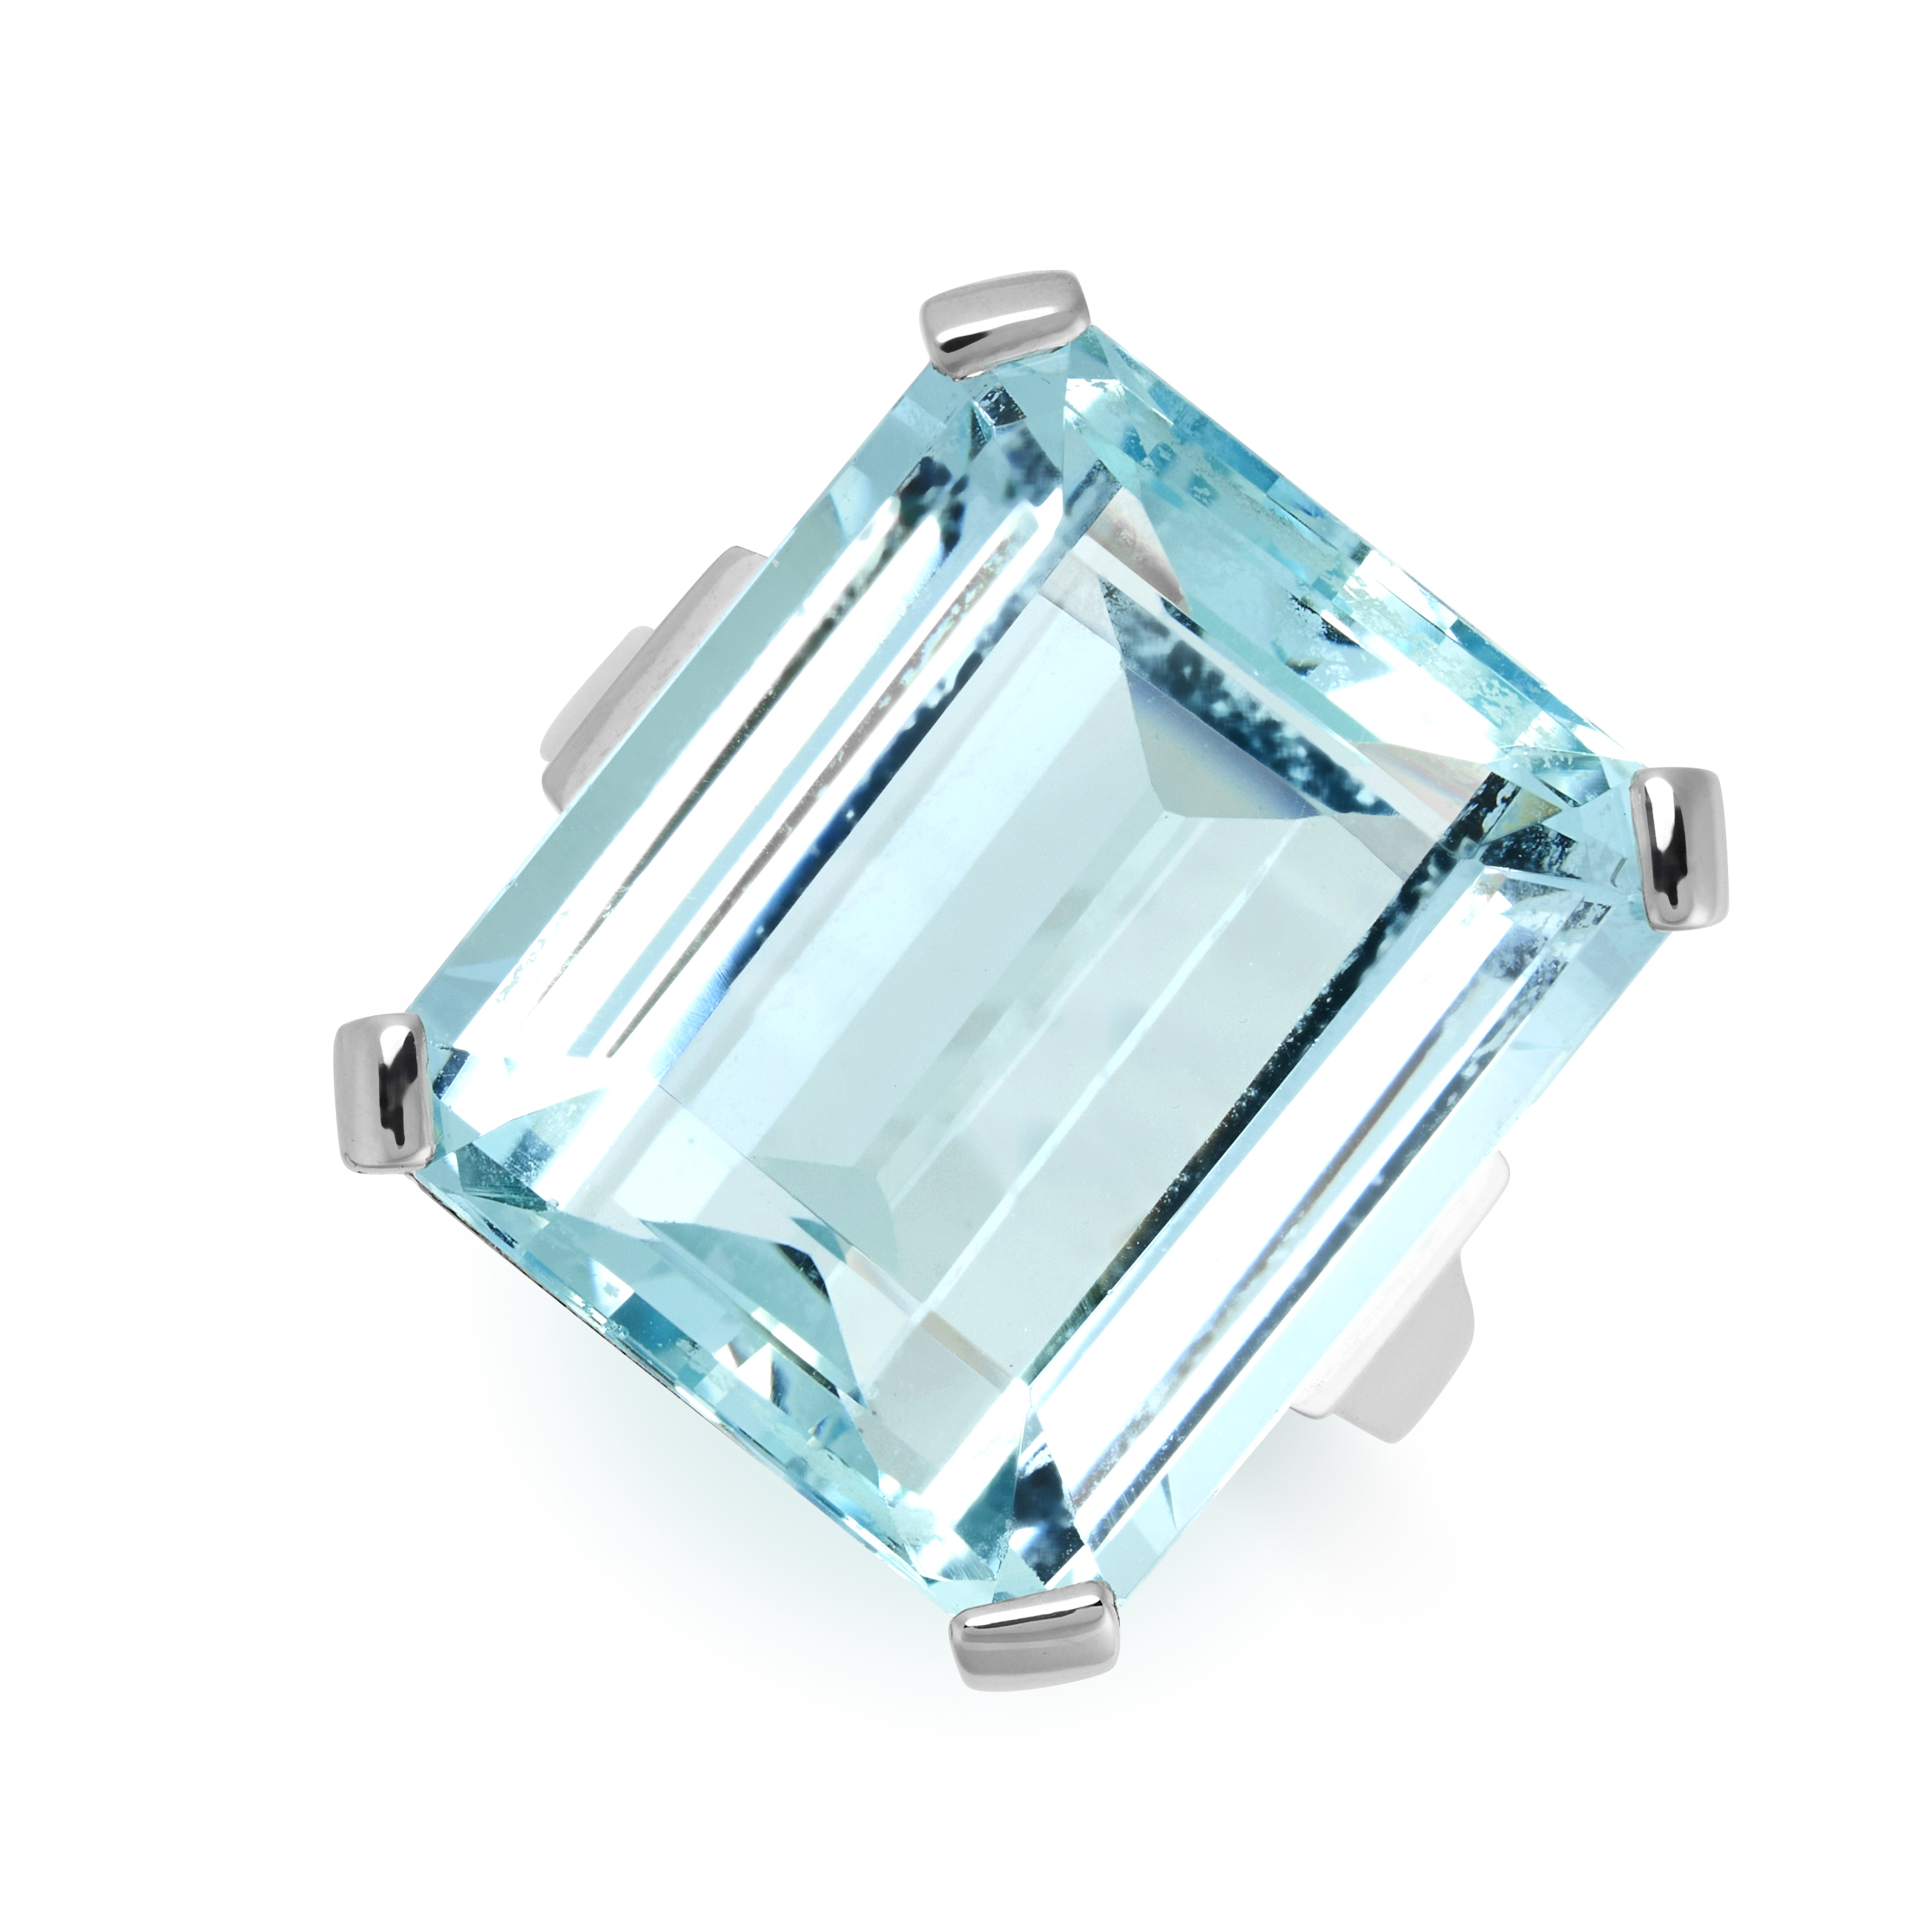 AN AQUAMARINE RING set with an emerald cut aquamarine weighing 19.57 carats, stamped 750, size L /